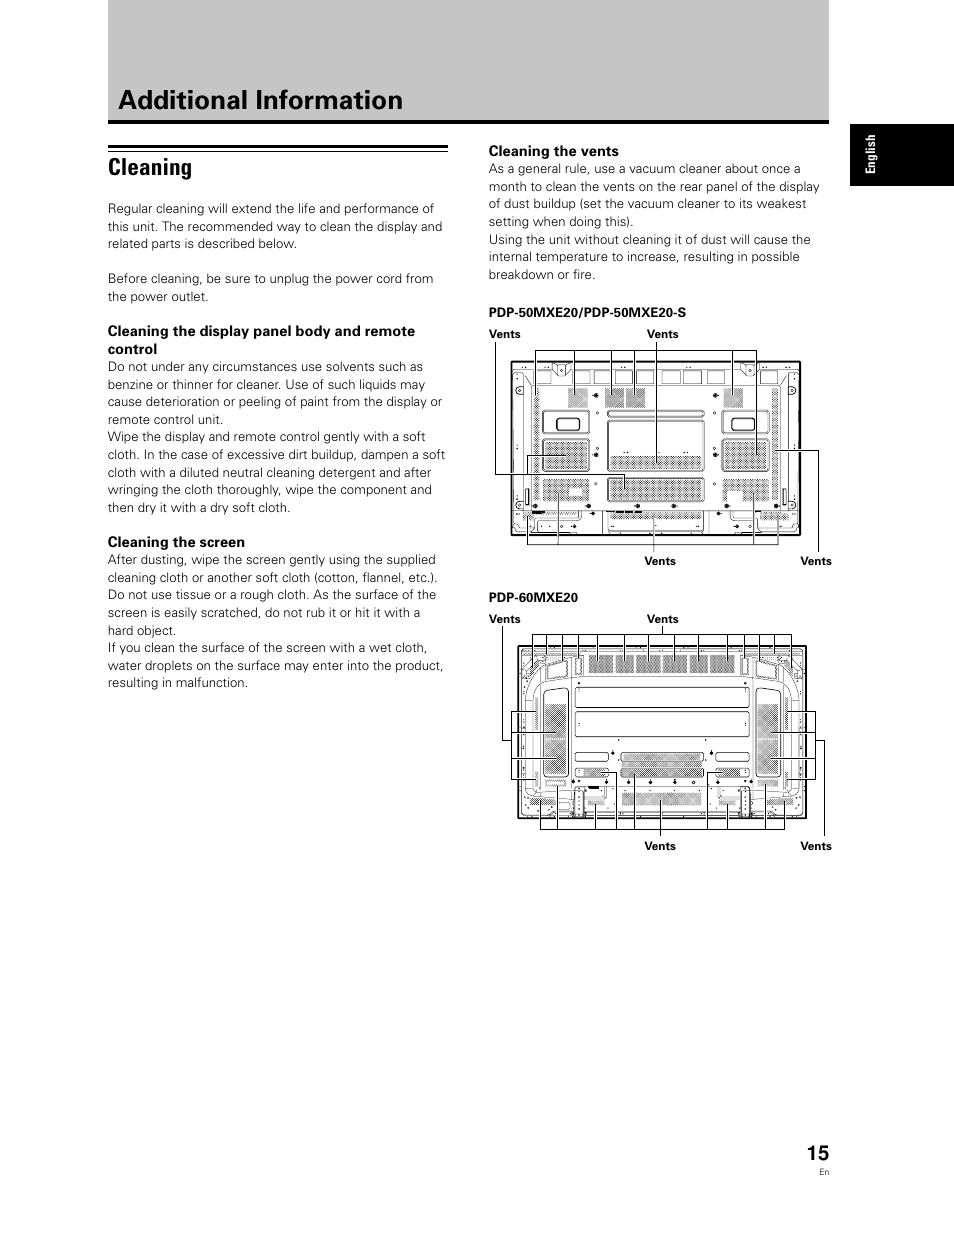 Additional information, Cleaning | Pioneer PDP-60MXE20 Manuel d'utilisation | Page 19 / 46